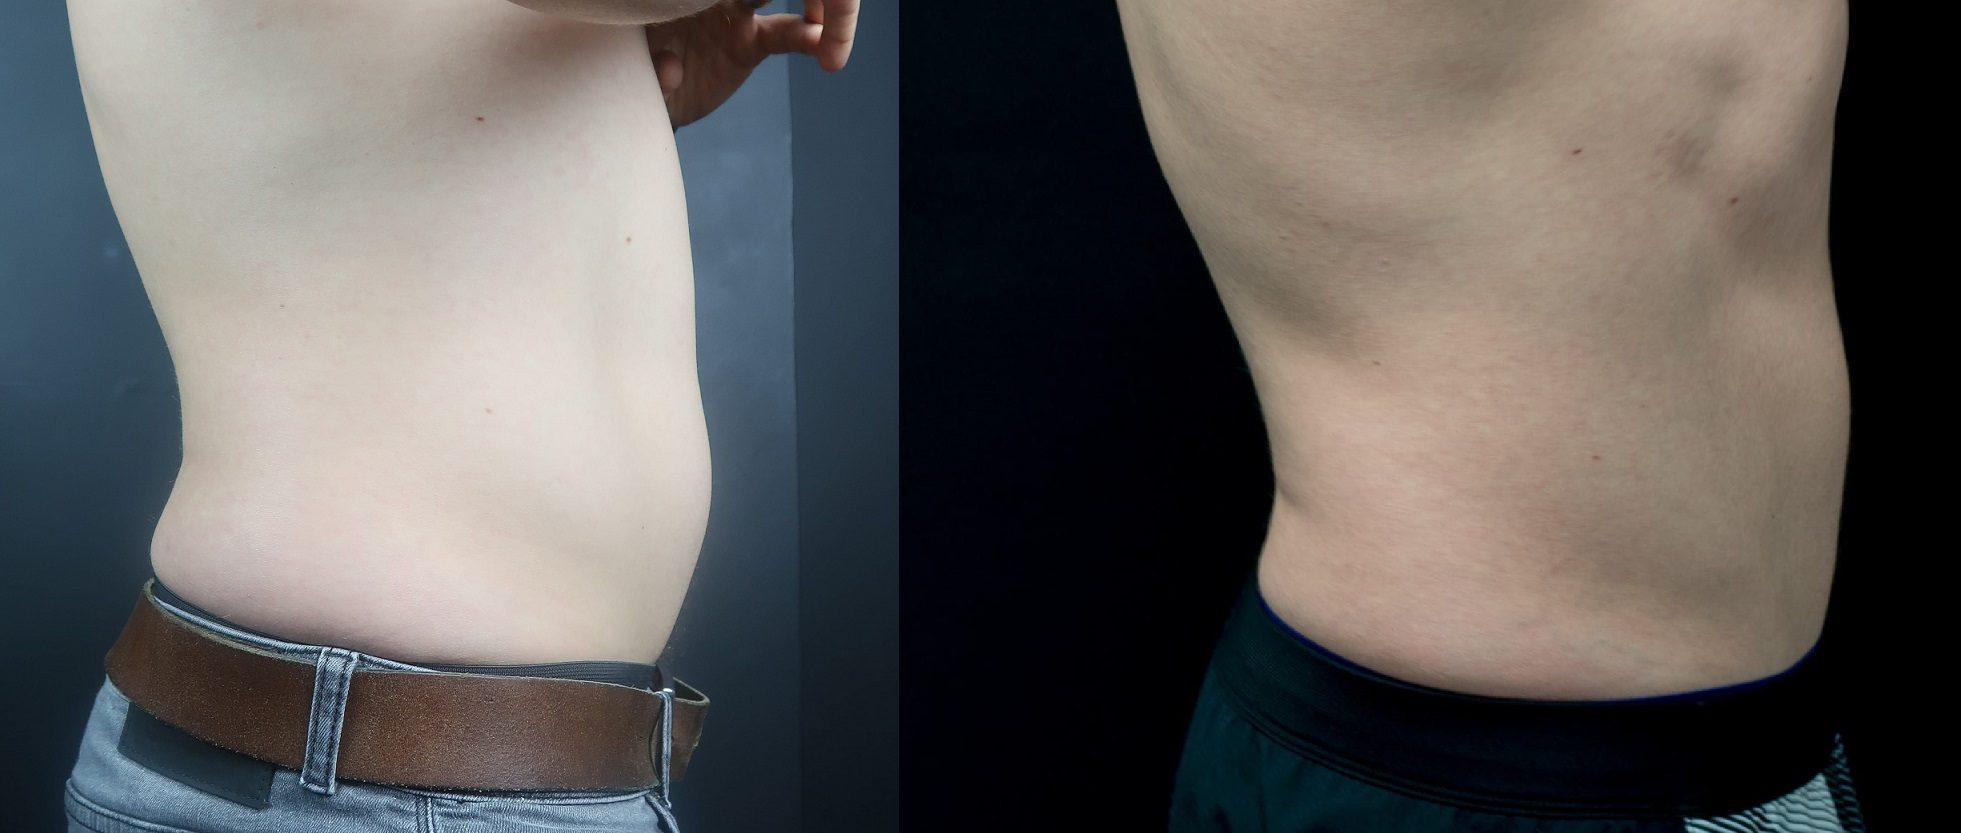 belly fat coolsculpting before and after